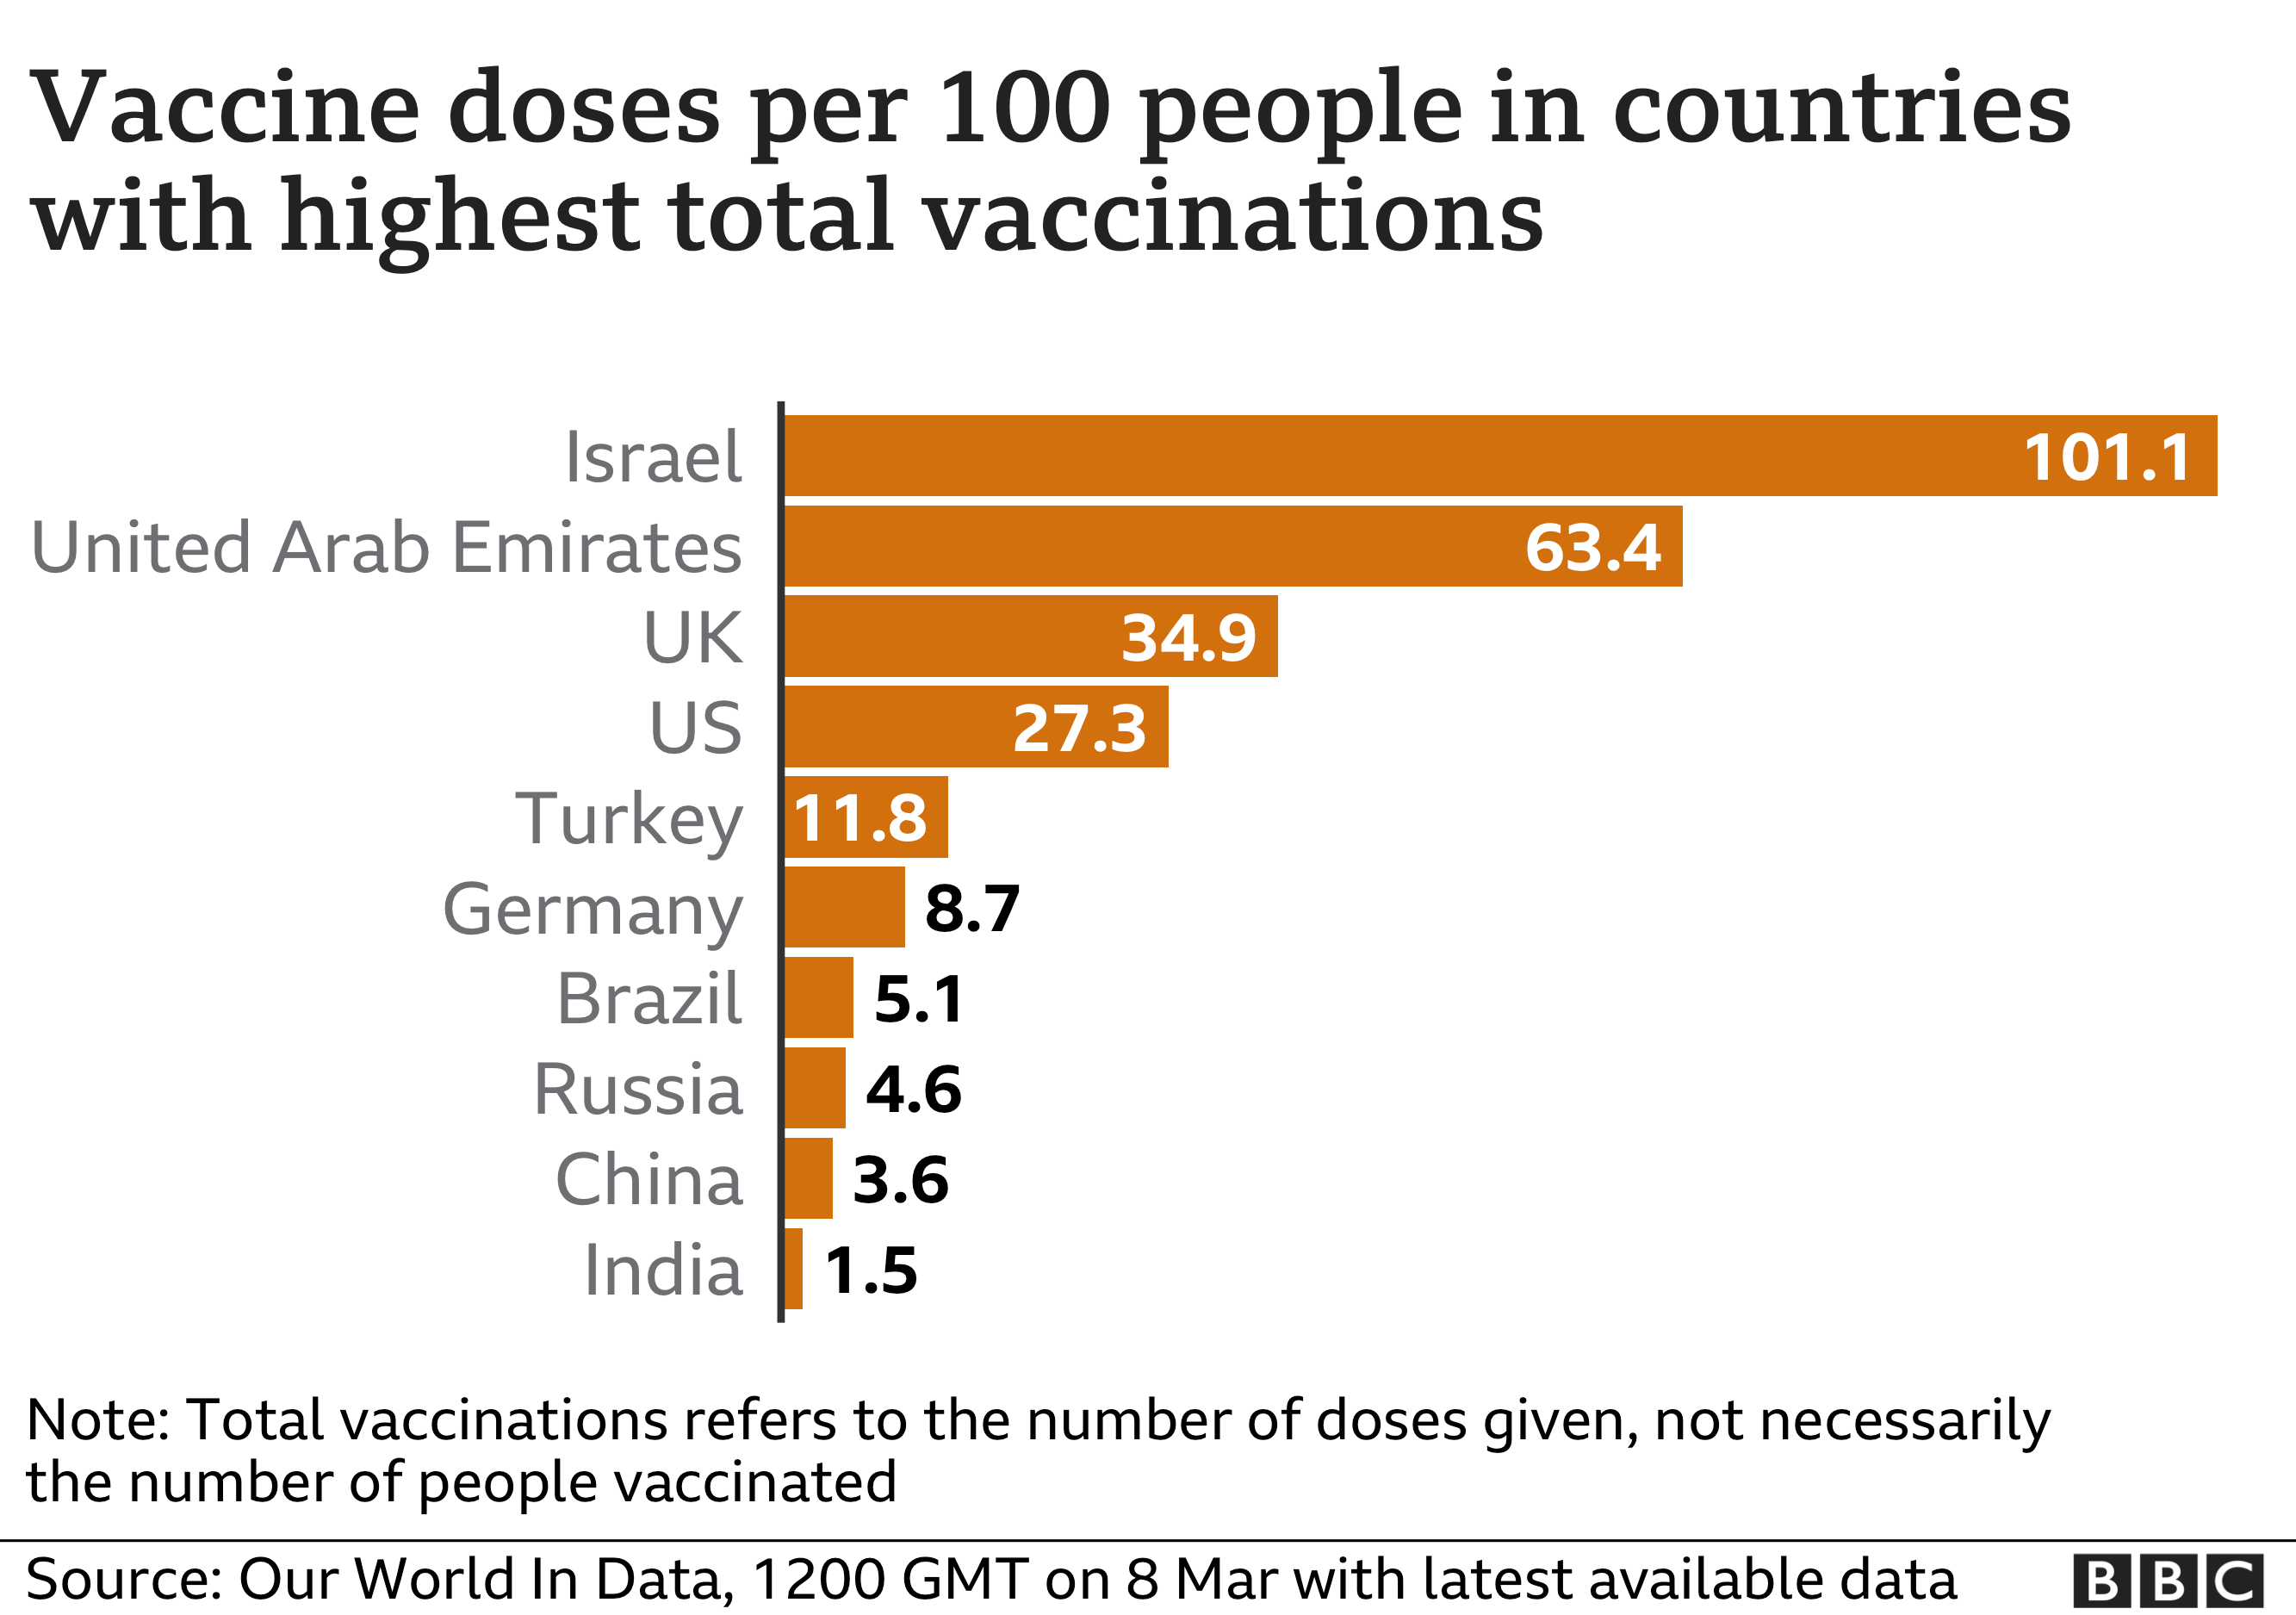 Chart showing vaccine doses per 100 people in countries with the highest total vaccinations. Updated 8 March.